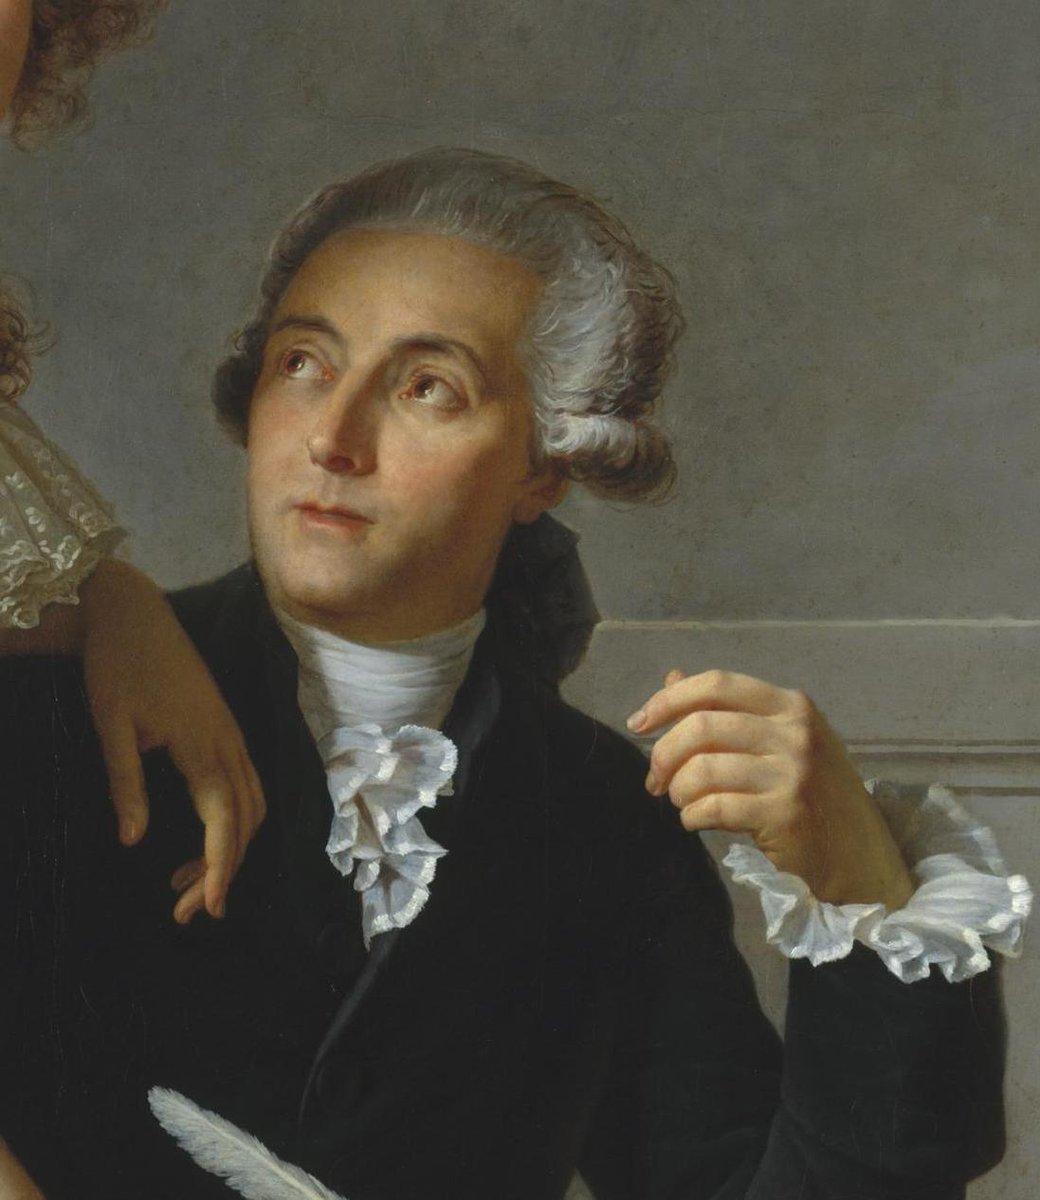 Antoine Lavoisier is often called the father of modern chemistry. He was executed by guillotine during the French Revolution. It is said that he told an assistant to time how long his eyes continued to move after decapitation, trying to experiment even in his last moments.